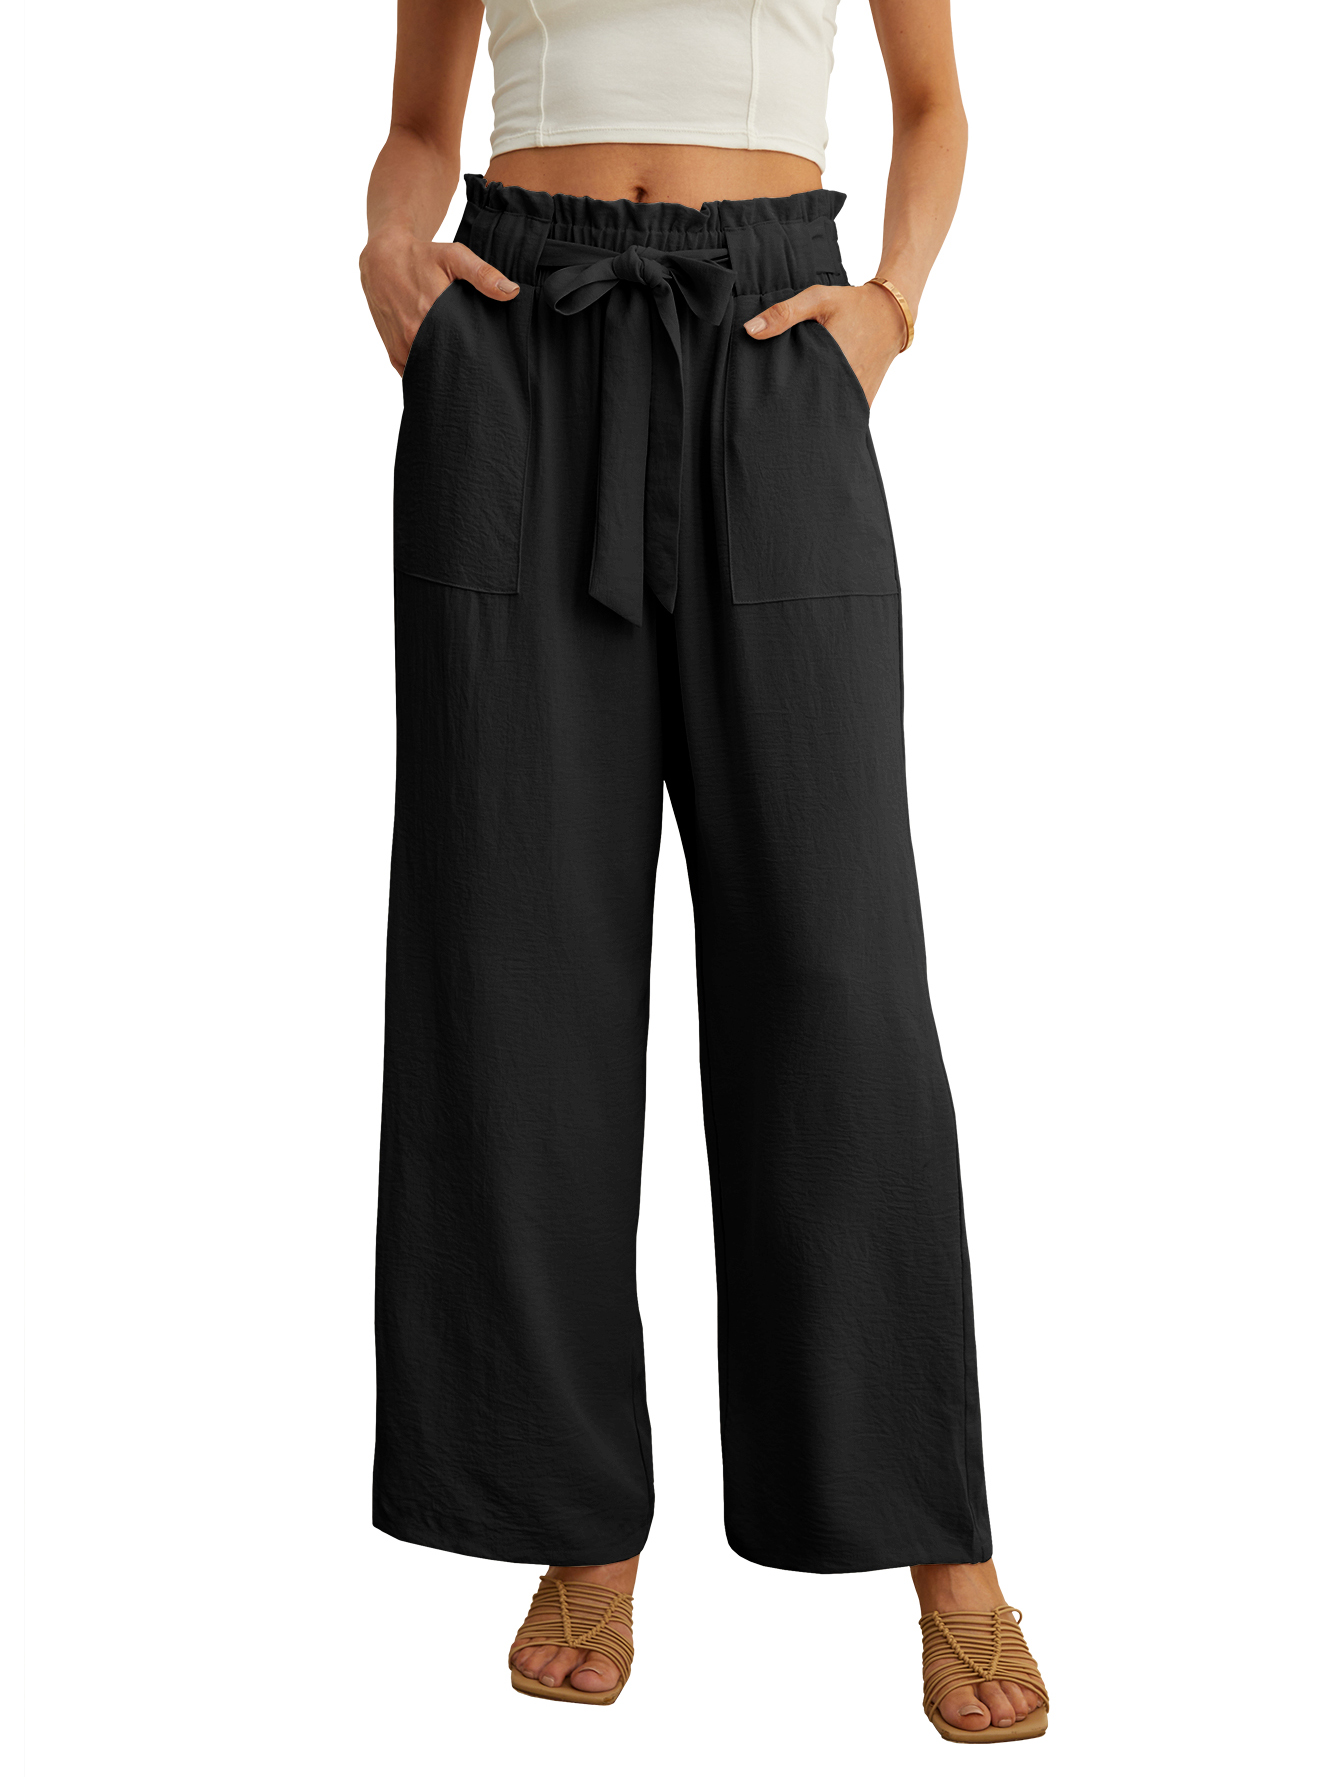 Chiclily Women's Wide Leg Pants with Pockets Lightweight High Waisted ...